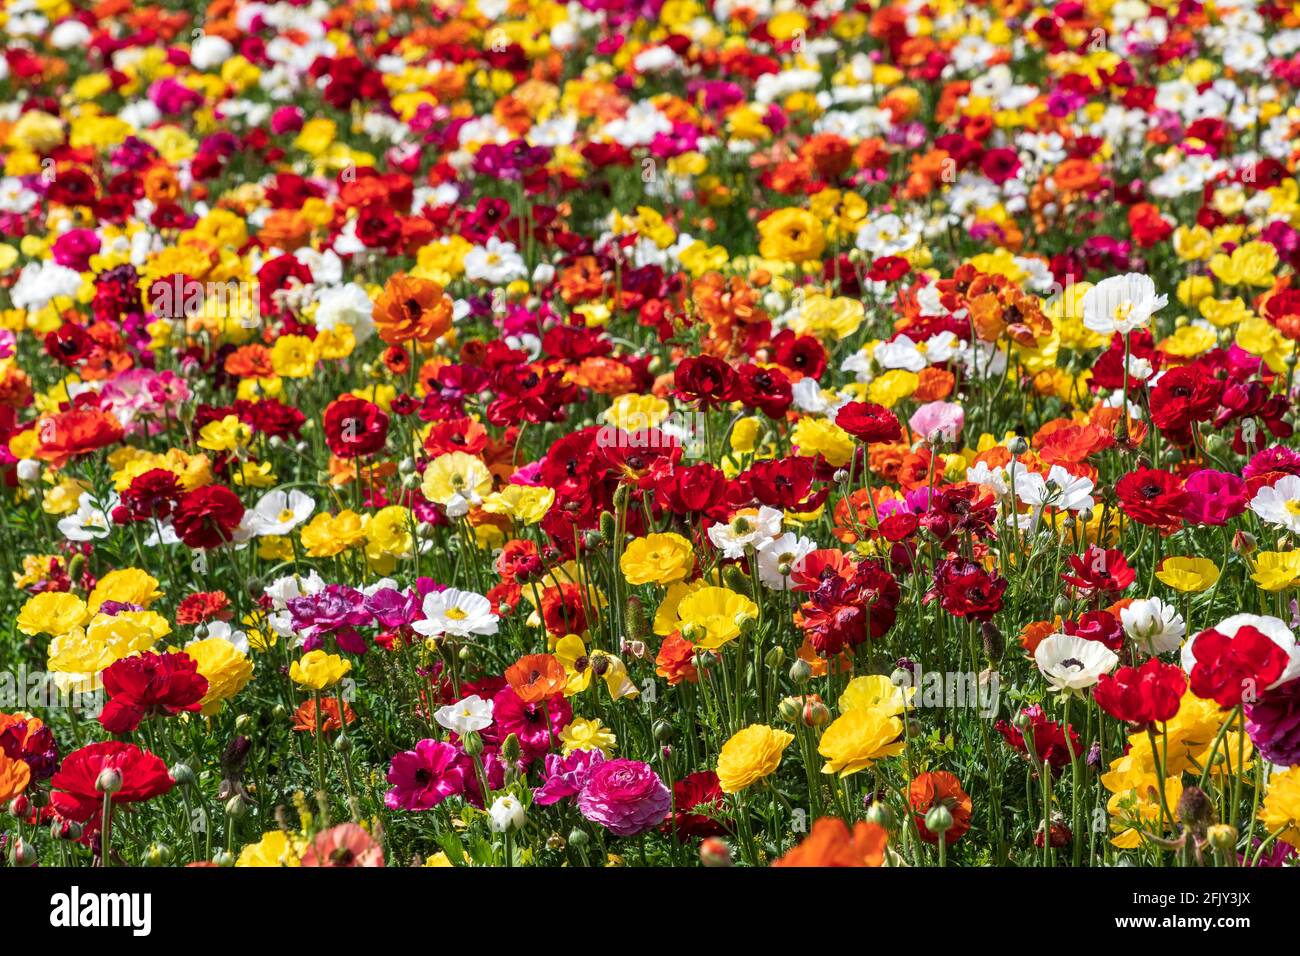 Fields of flowering multi-colored garden cultivated buttercups.Israel Stock Photo